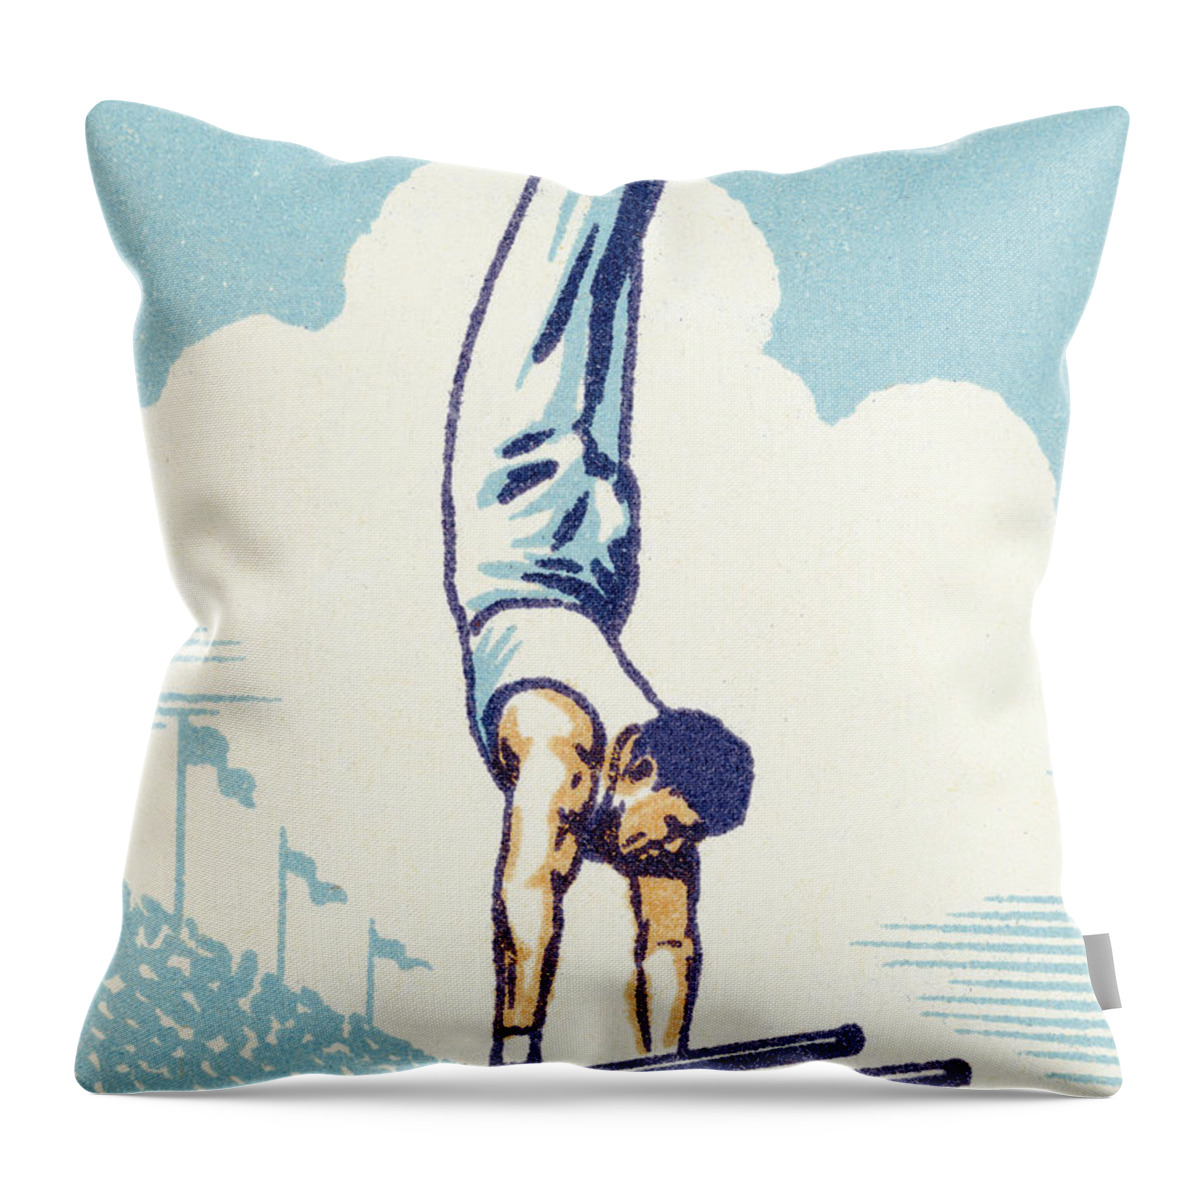 Adult Throw Pillow featuring the drawing Male gymnast by CSA Images